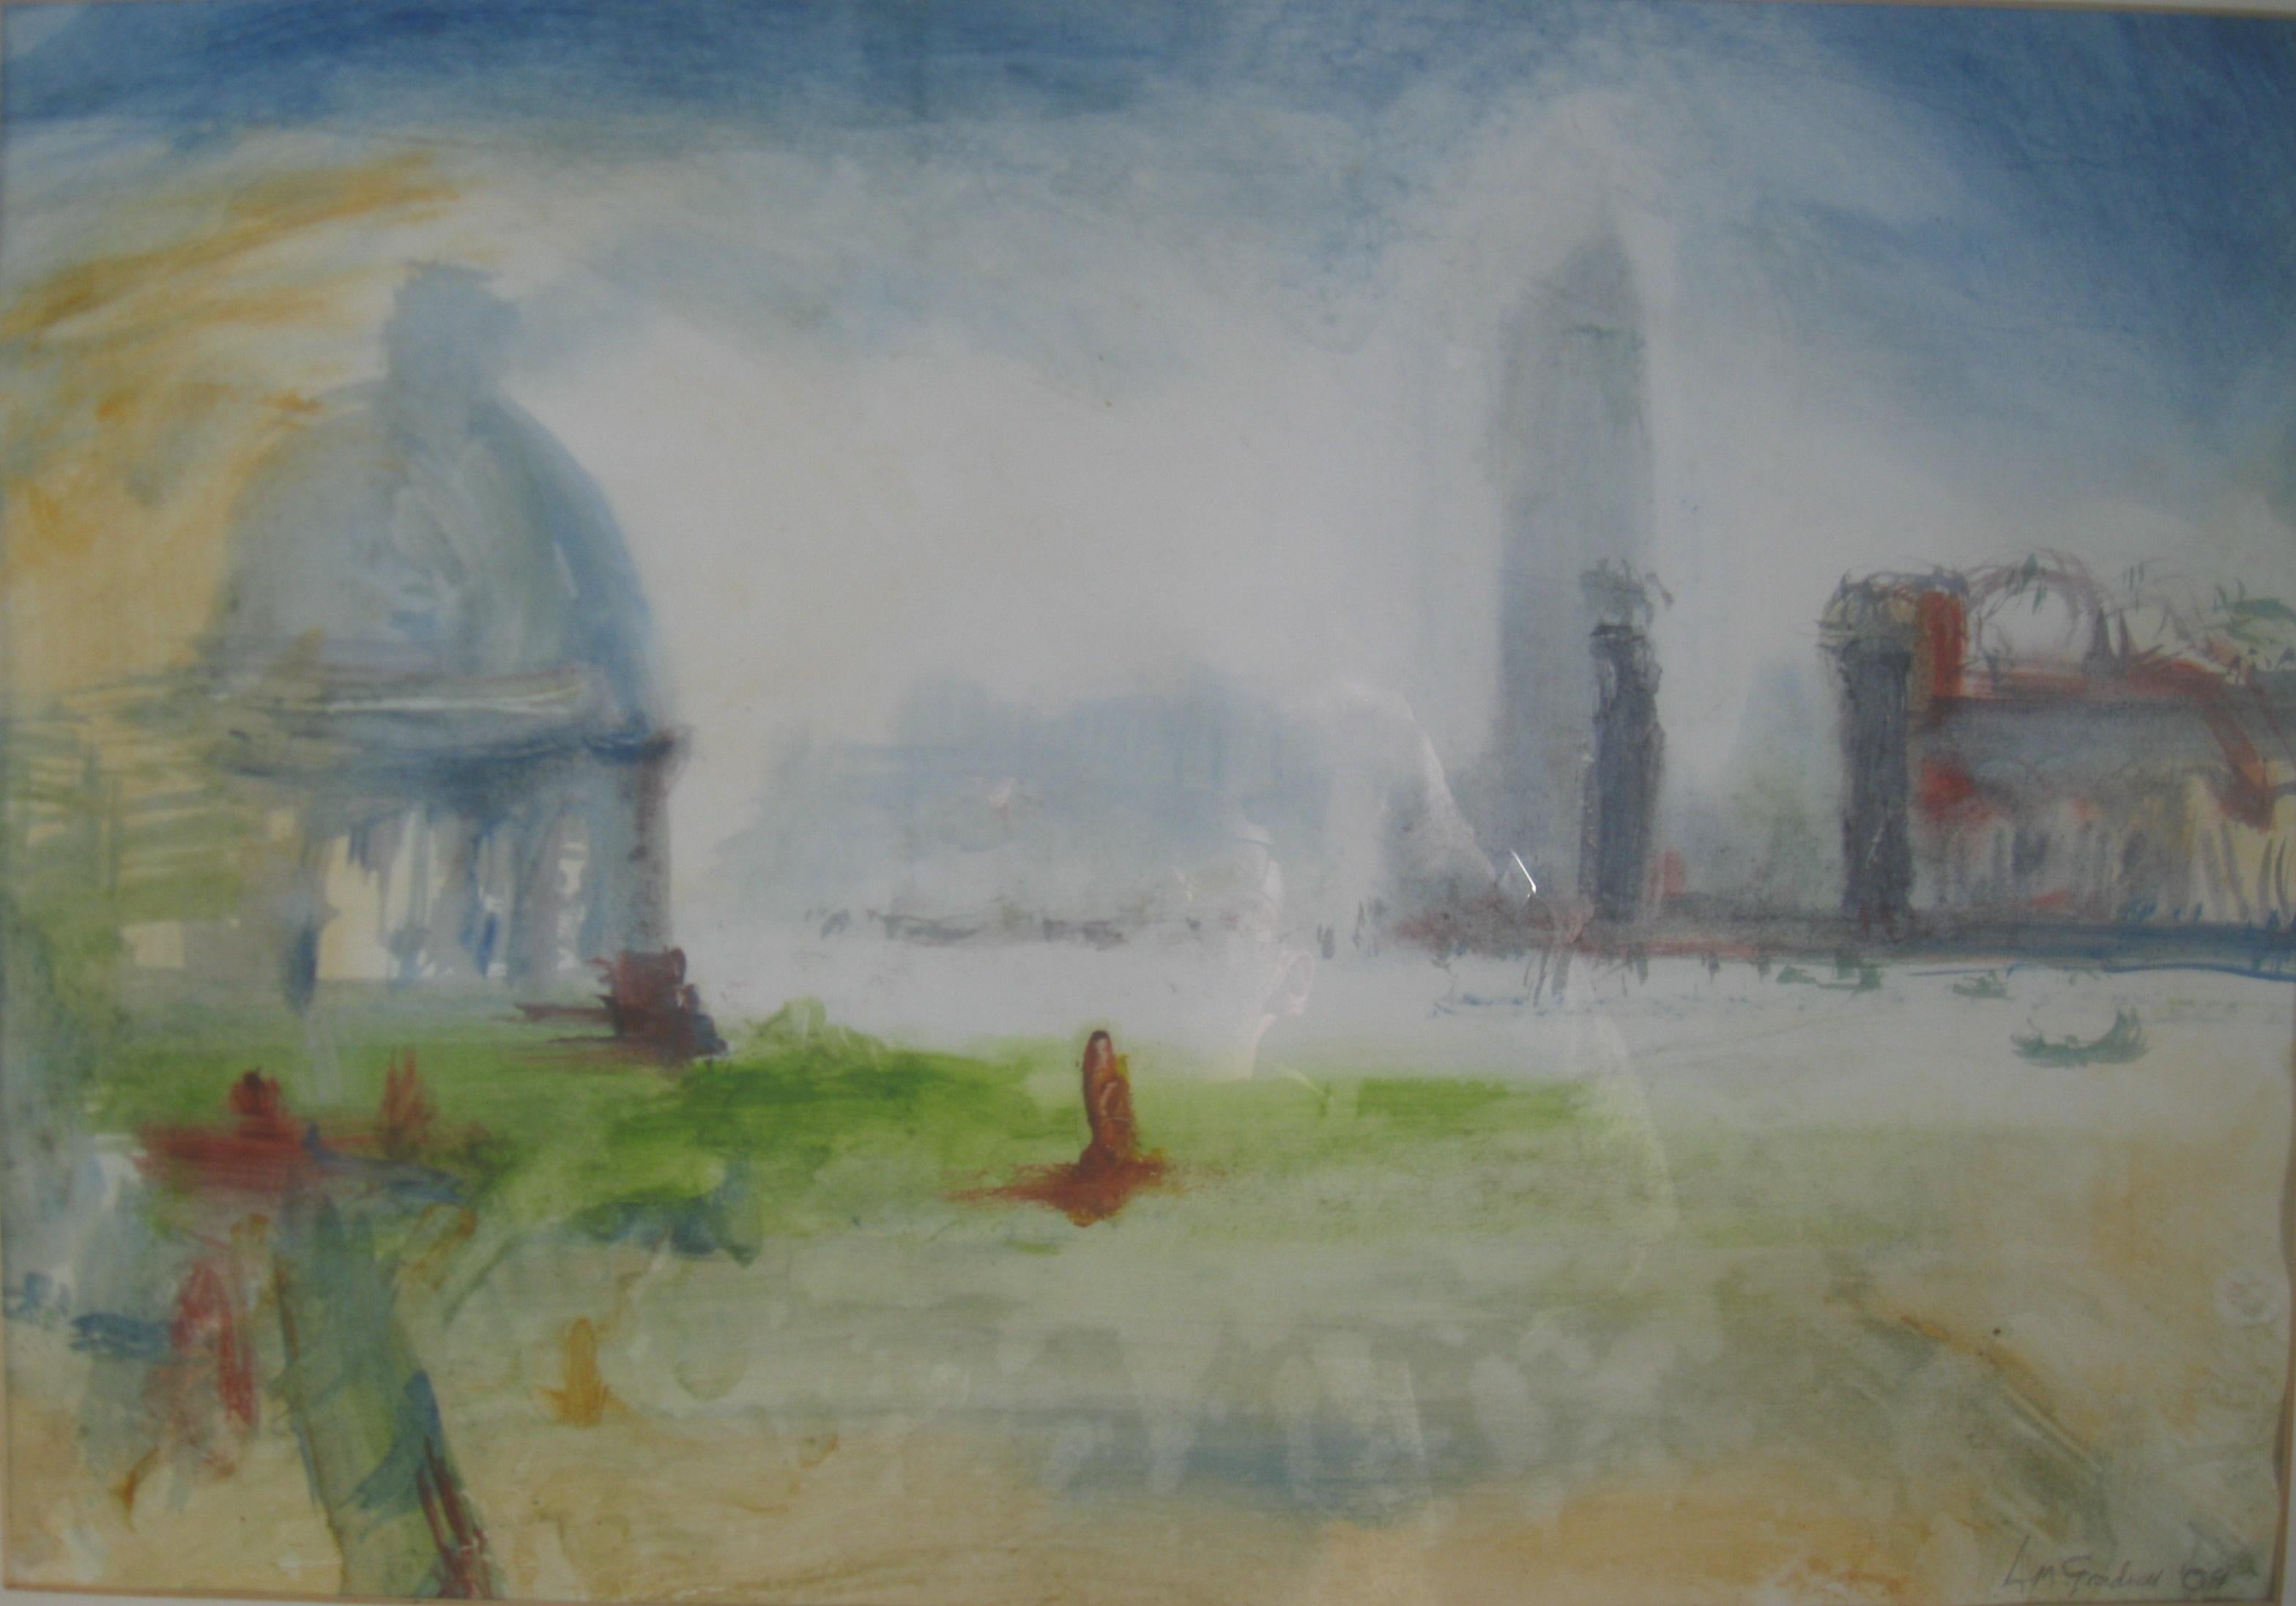 'Venice, Lagoon in morning Haze', mixed media on paper. Circa 2007. - Painting by Andy Gradwell